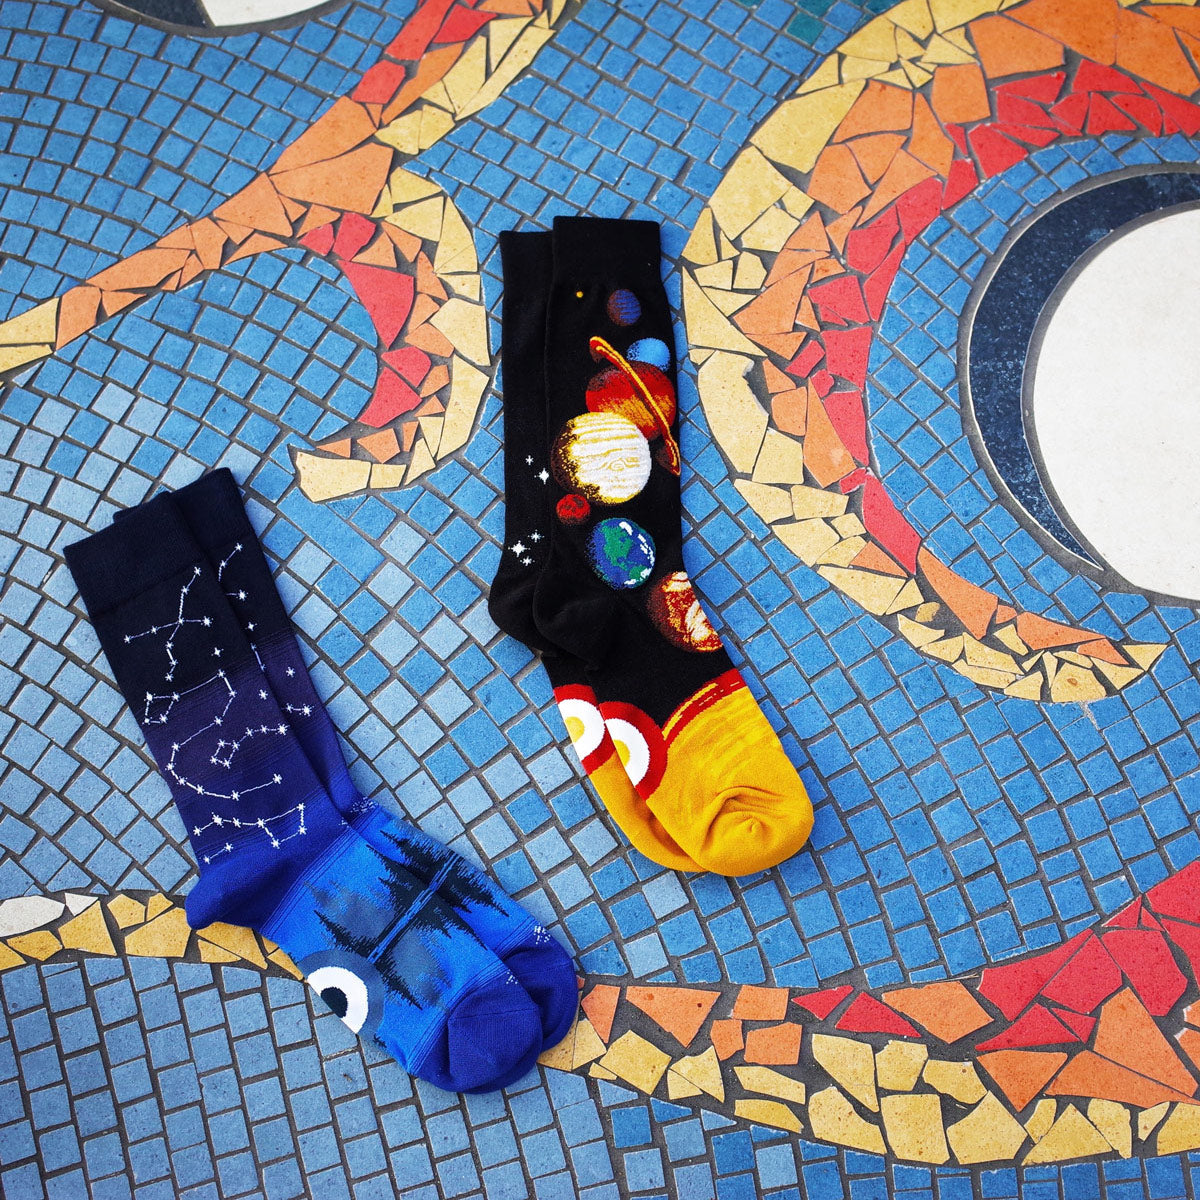 Space socks with stars and solar system planets.